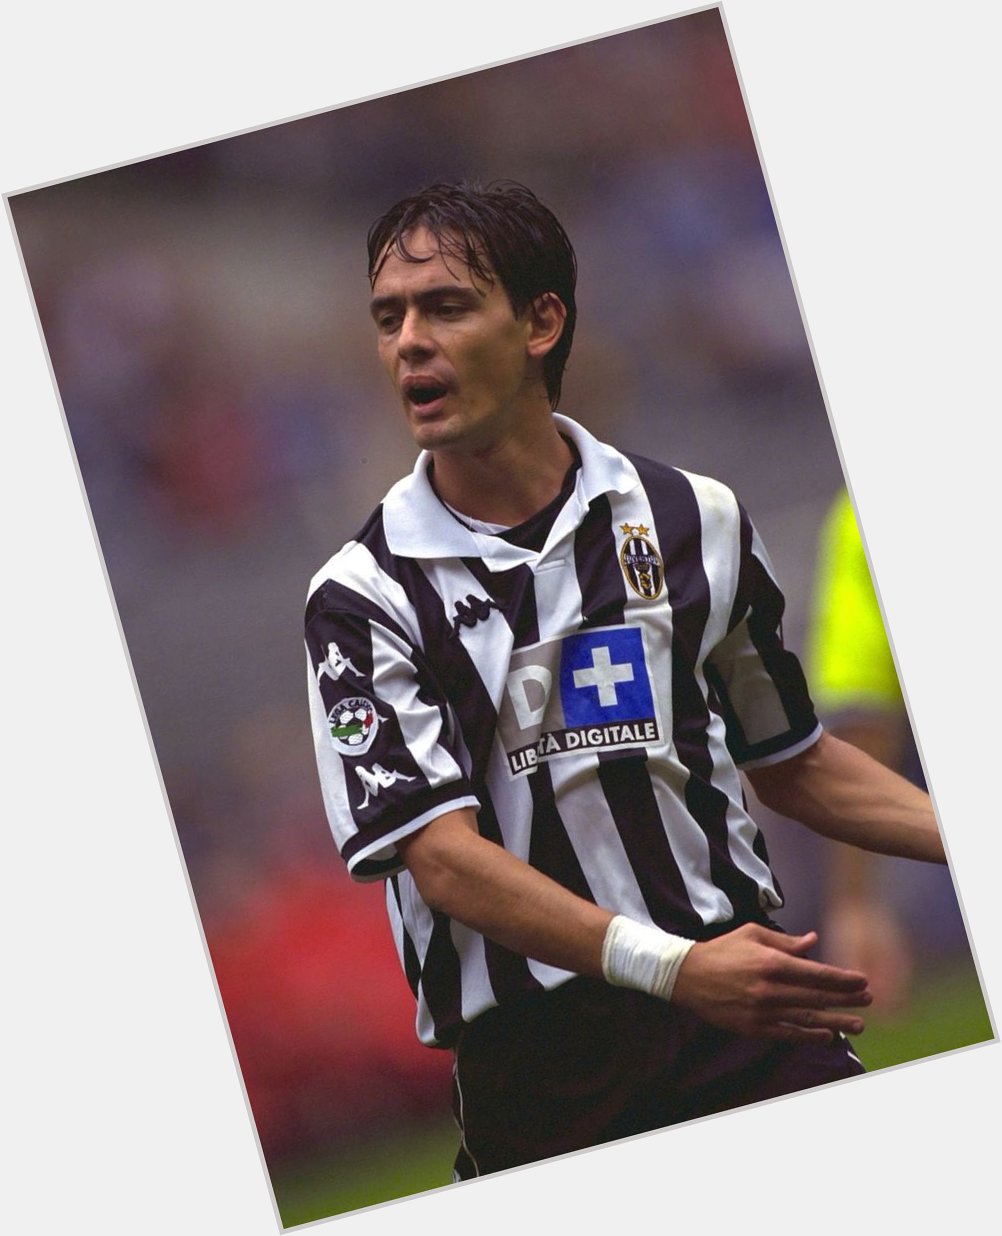 Happy birthday to former Juventus striker Filippo Inzaghi, who turns 44 today.

Games: 165
Goals: 89 : 3 